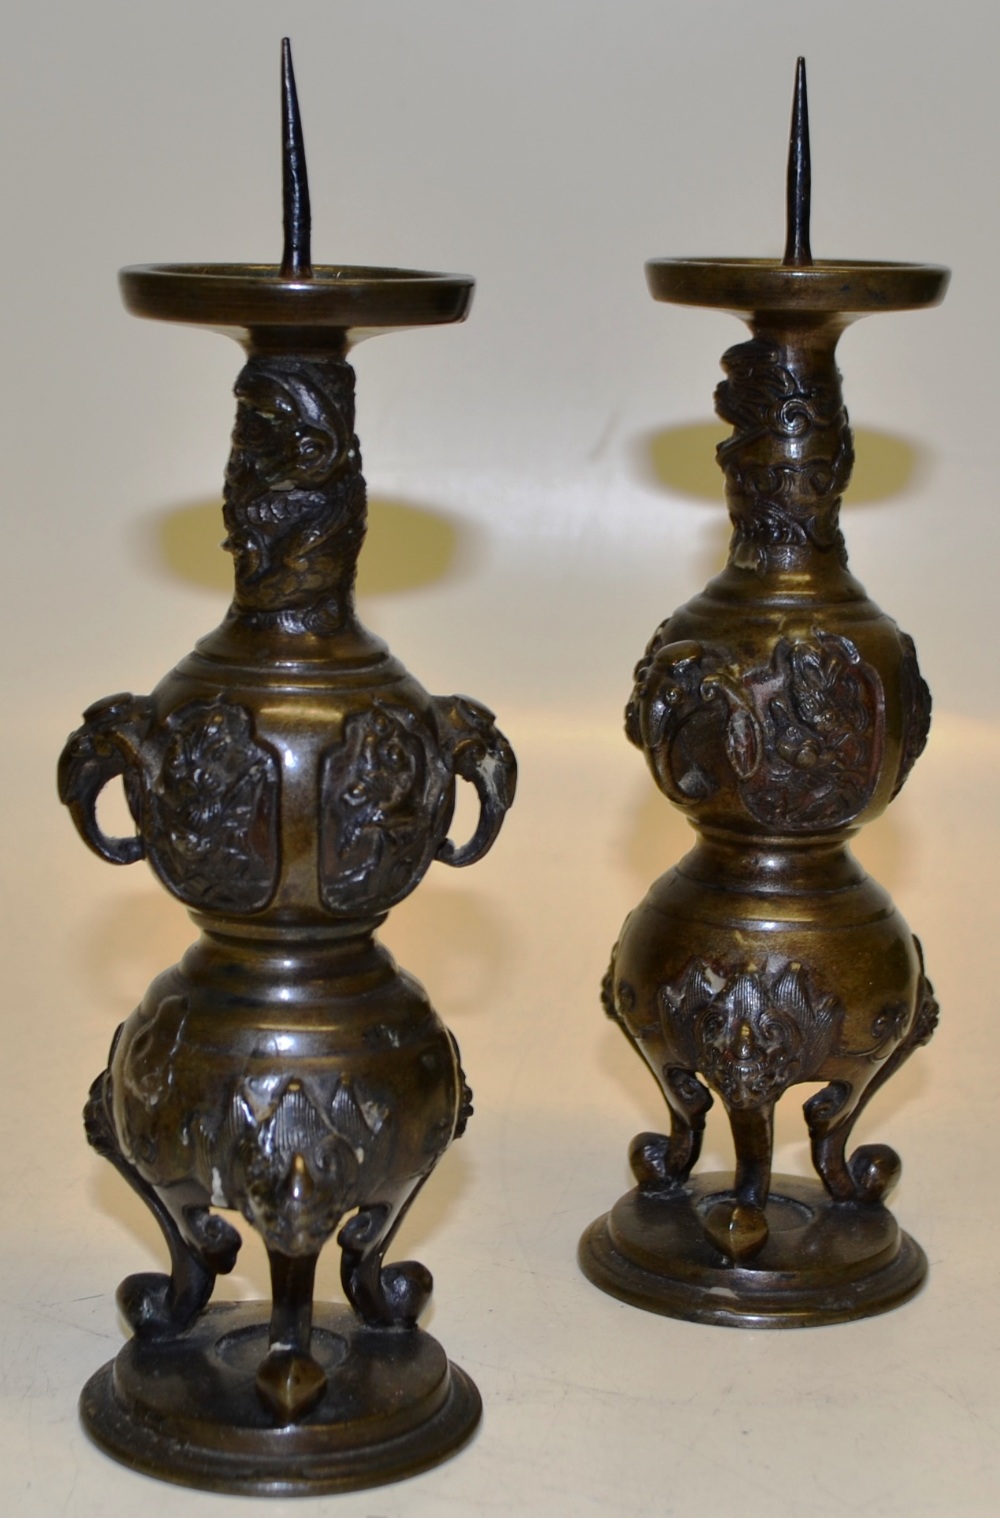 A pair of Japanese late nineteenth century bronze candlesticks, with iron prickets to the